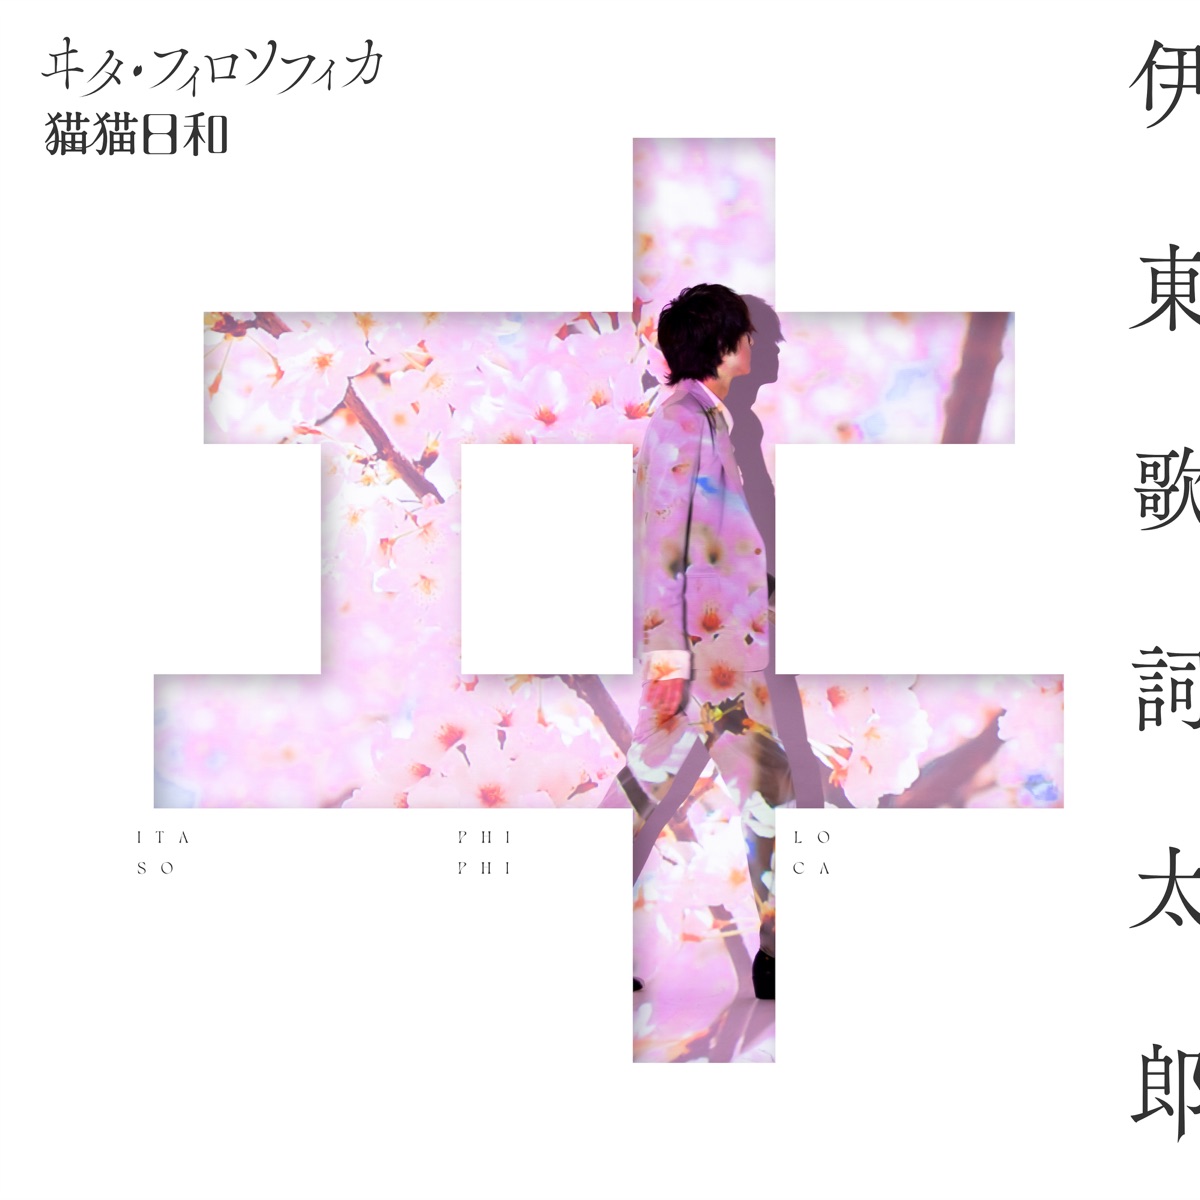 Cover art for『Kashitaro Ito - ヰタ・フィロソフィカ』from the release『Ita Philosophica